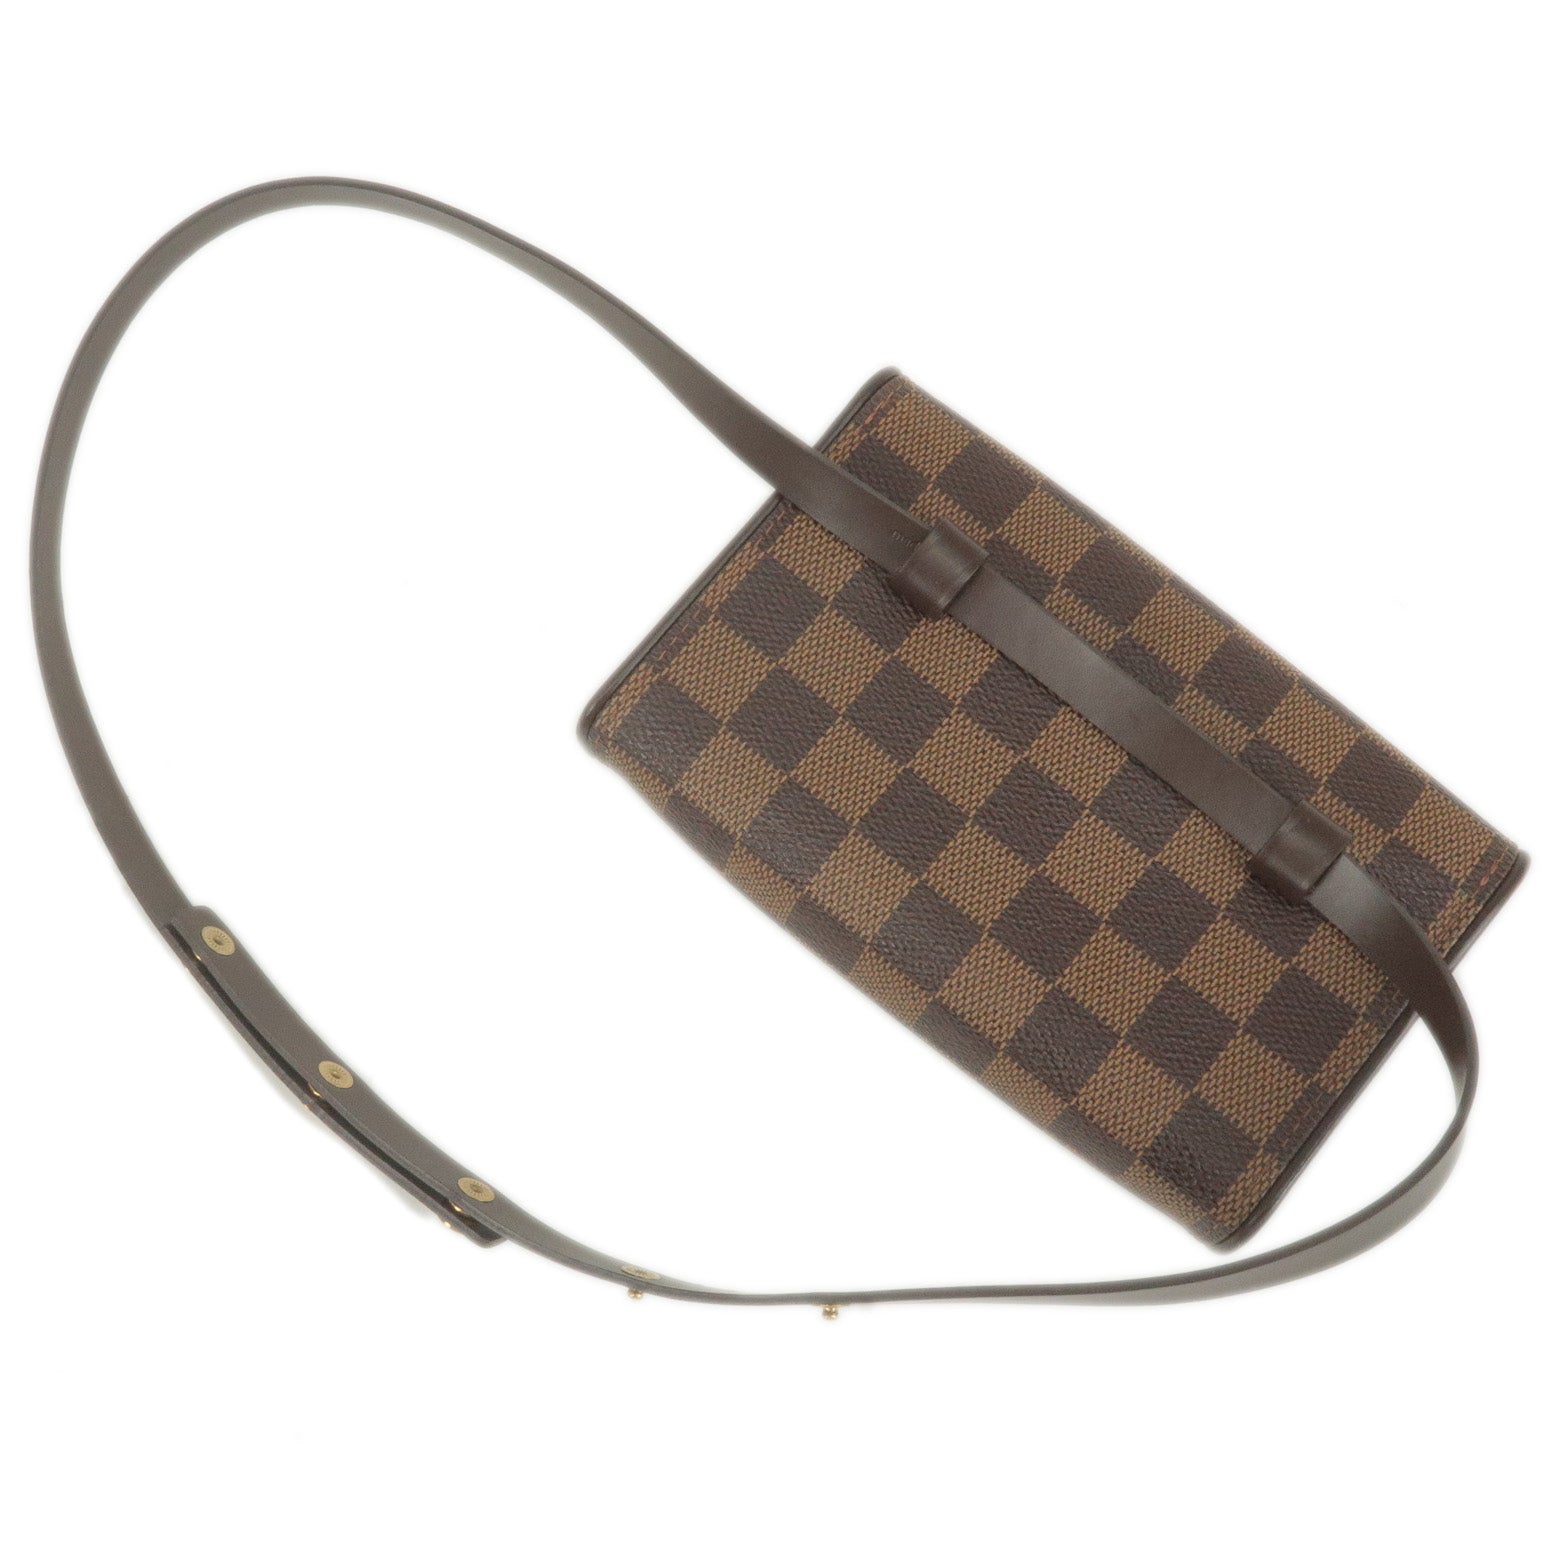 Requested: Updated Louis Vuitton Delightful Mini Pochette Review